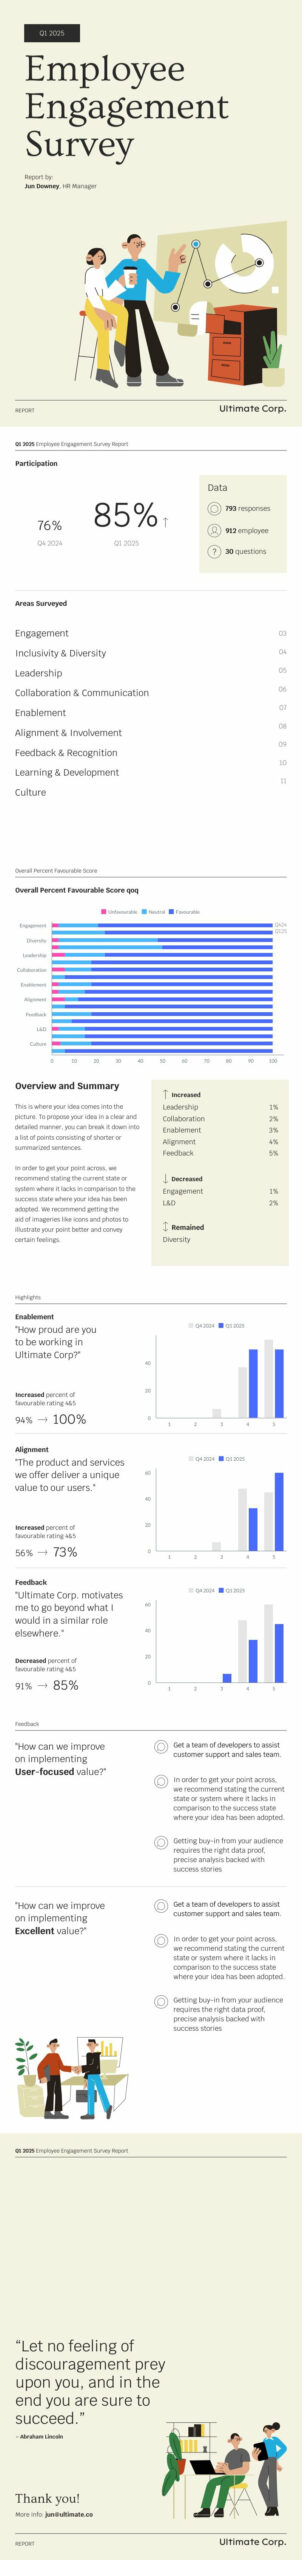 employee engagement survey result template to get good understanding about employees career goals